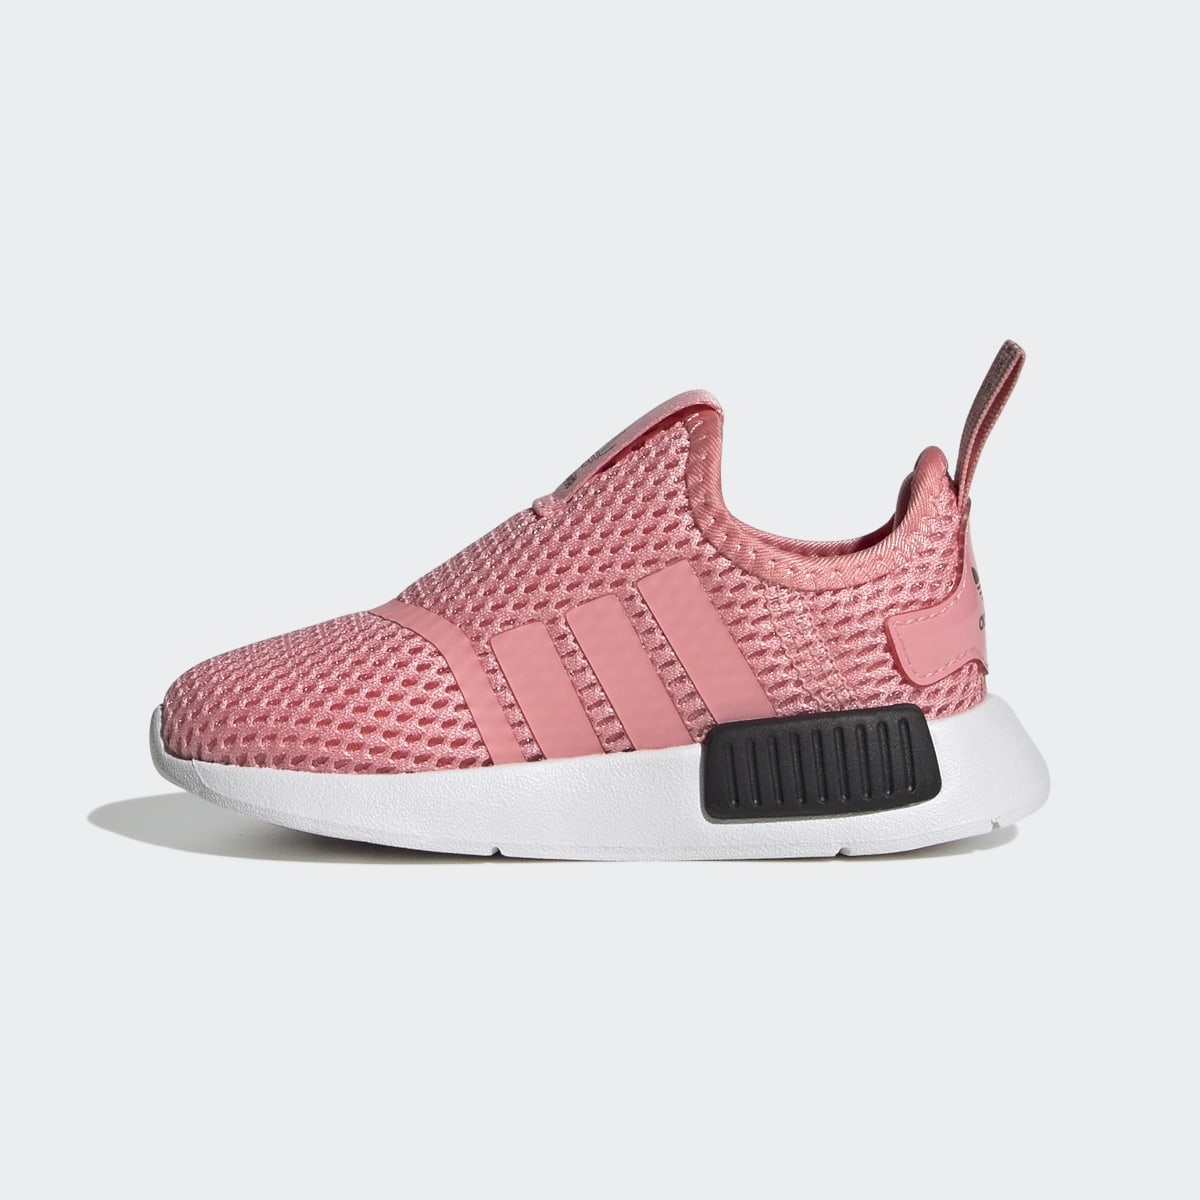 Adidas NMD 360 Shoes. 7